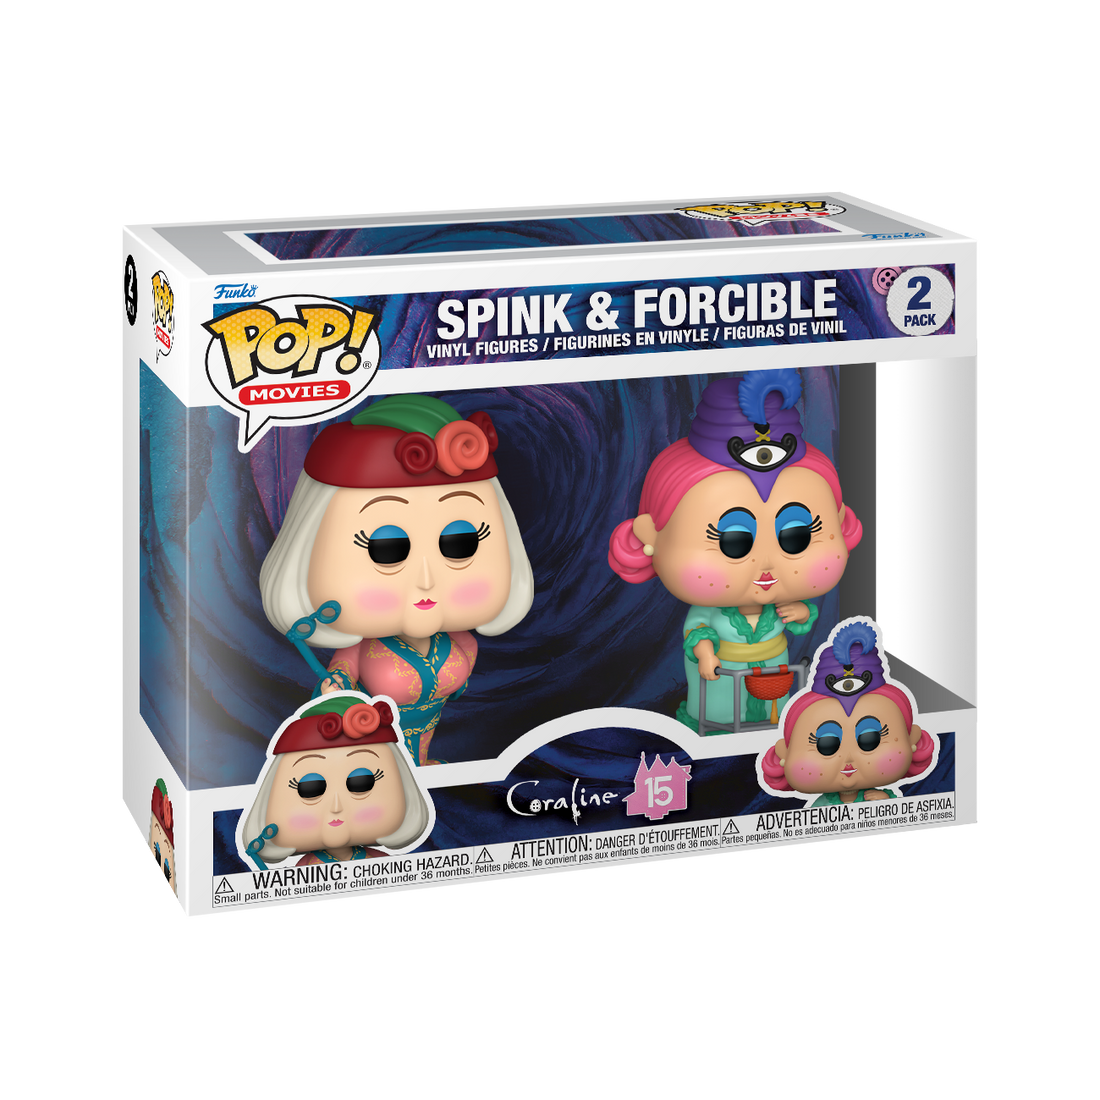 Funko Pop! Movies Coraline Spink & Forcible 2 Pack Funko